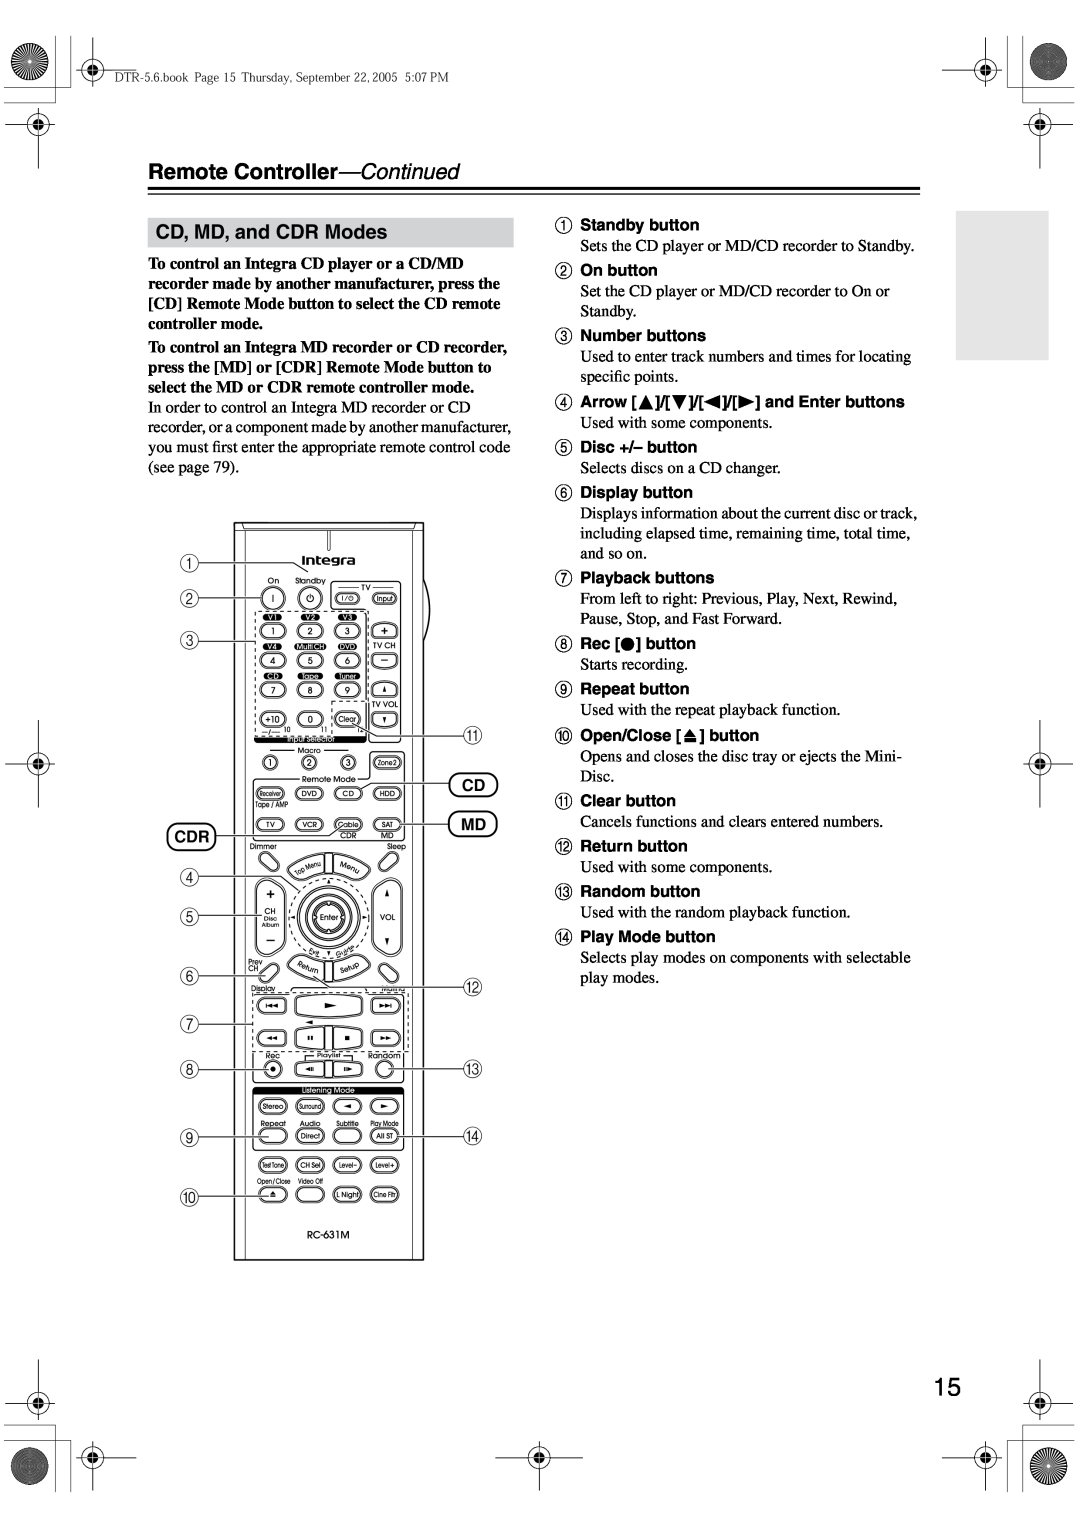 Integra DTR-5.6 instruction manual CD, MD, and CDR Modes, Remote Controller-Continued 